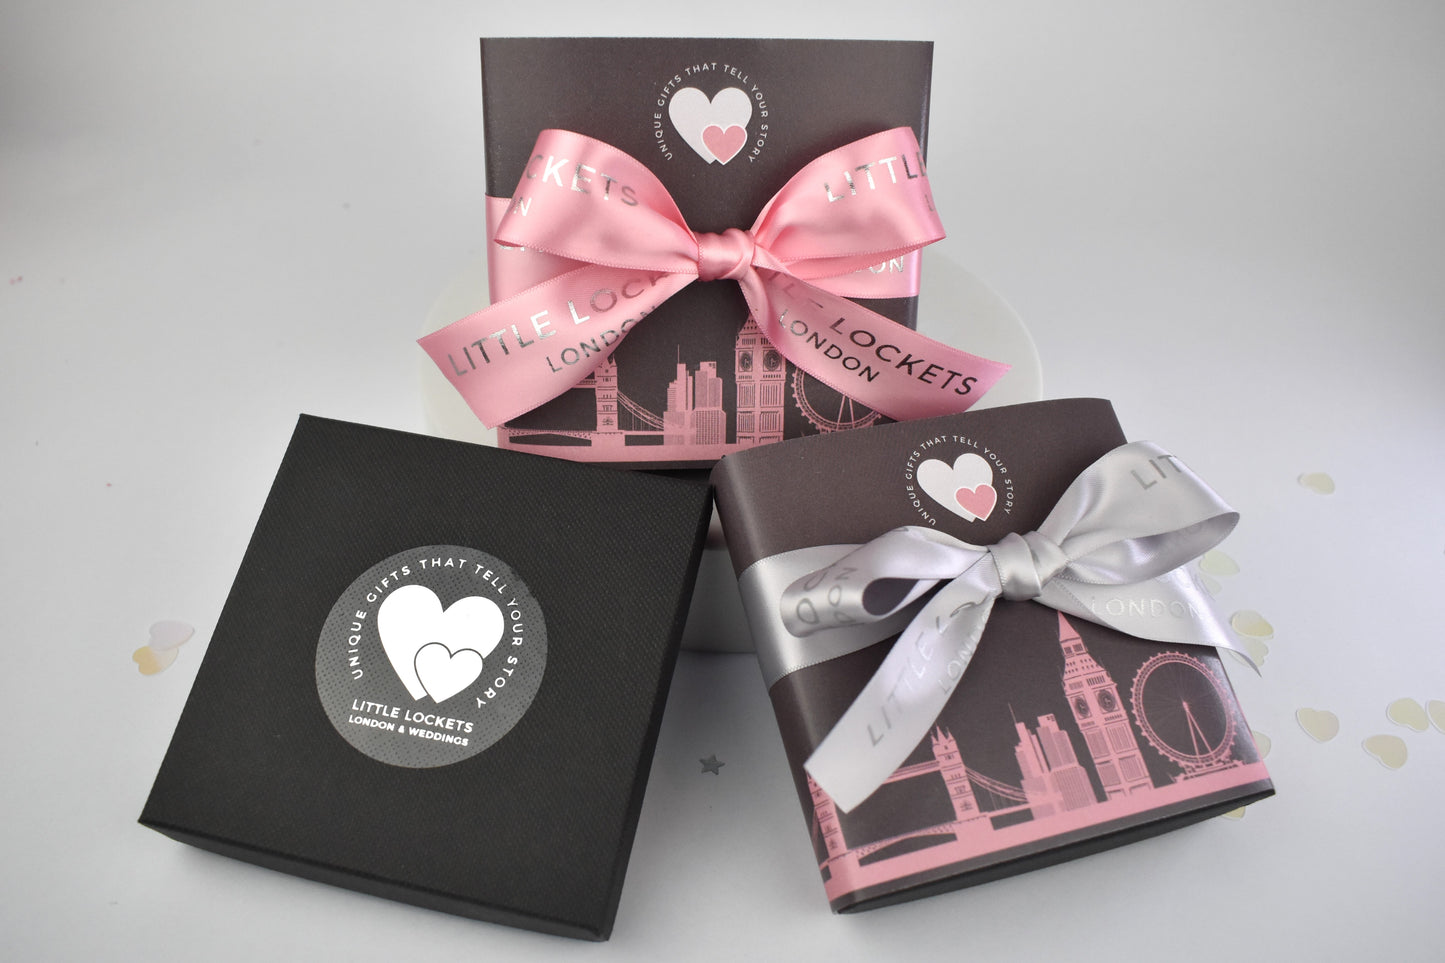 Your gift will arrive in a branded gift box or upgrade to a London skyline wrap and pink or grey ribbon tie